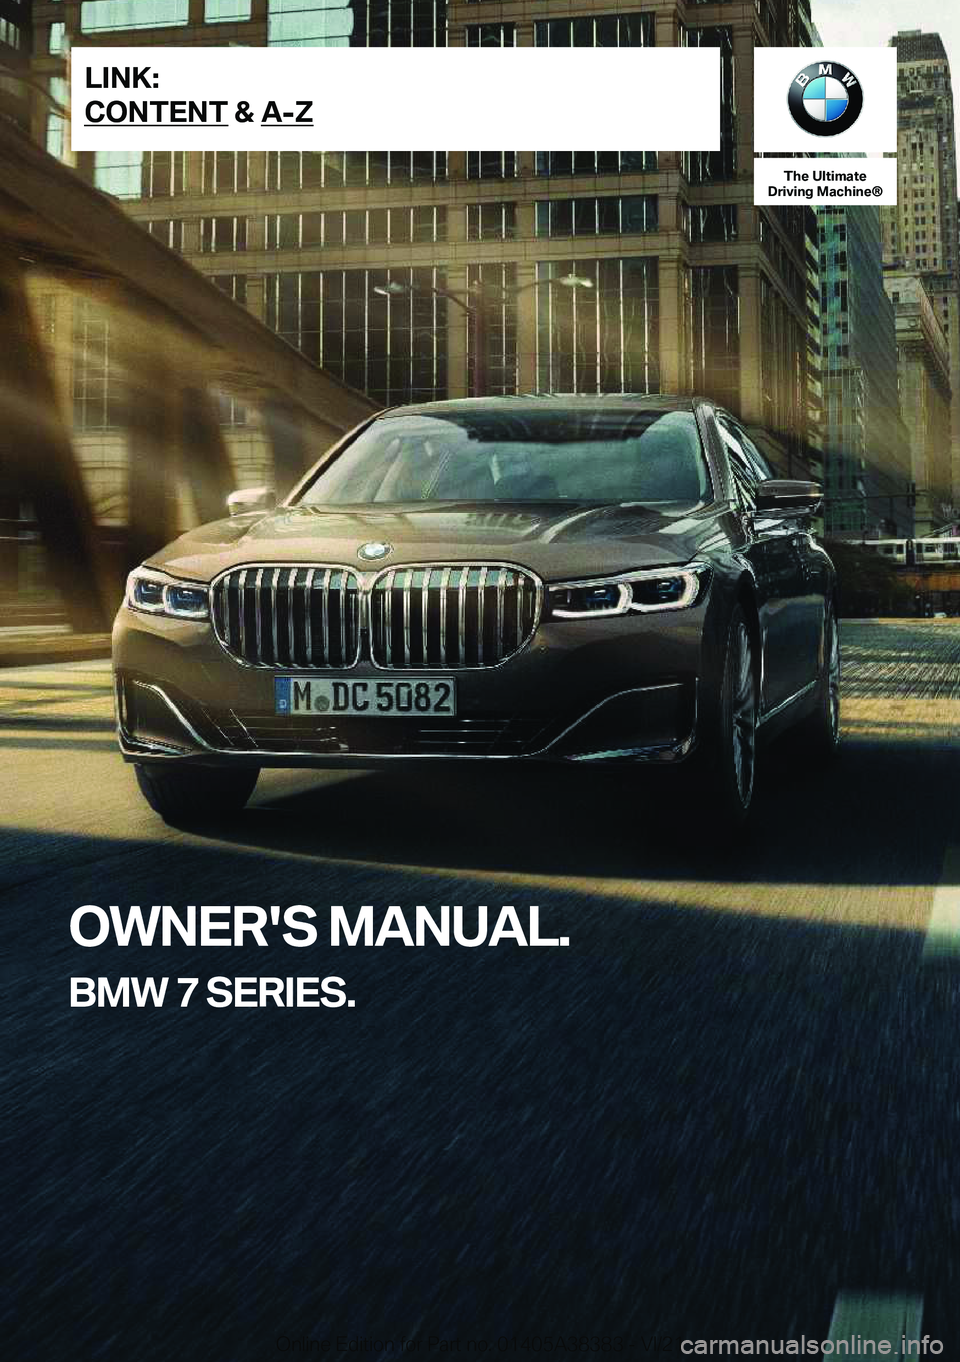 BMW 7 SERIES 2022  Owners Manual �T�h�e��U�l�t�i�m�a�t�e
�D�r�i�v�i�n�g��M�a�c�h�i�n�e�n
�O�W�N�E�R�'�S��M�A�N�U�A�L�.
�B�M�W��7��S�E�R�I�E�S�.�L�I�N�K�:
�C�O�N�T�E�N�T��&��A�-�Z�O�n�l�i�n�e��E�d�i�t�i�o�n��f�o�r��P�a�r